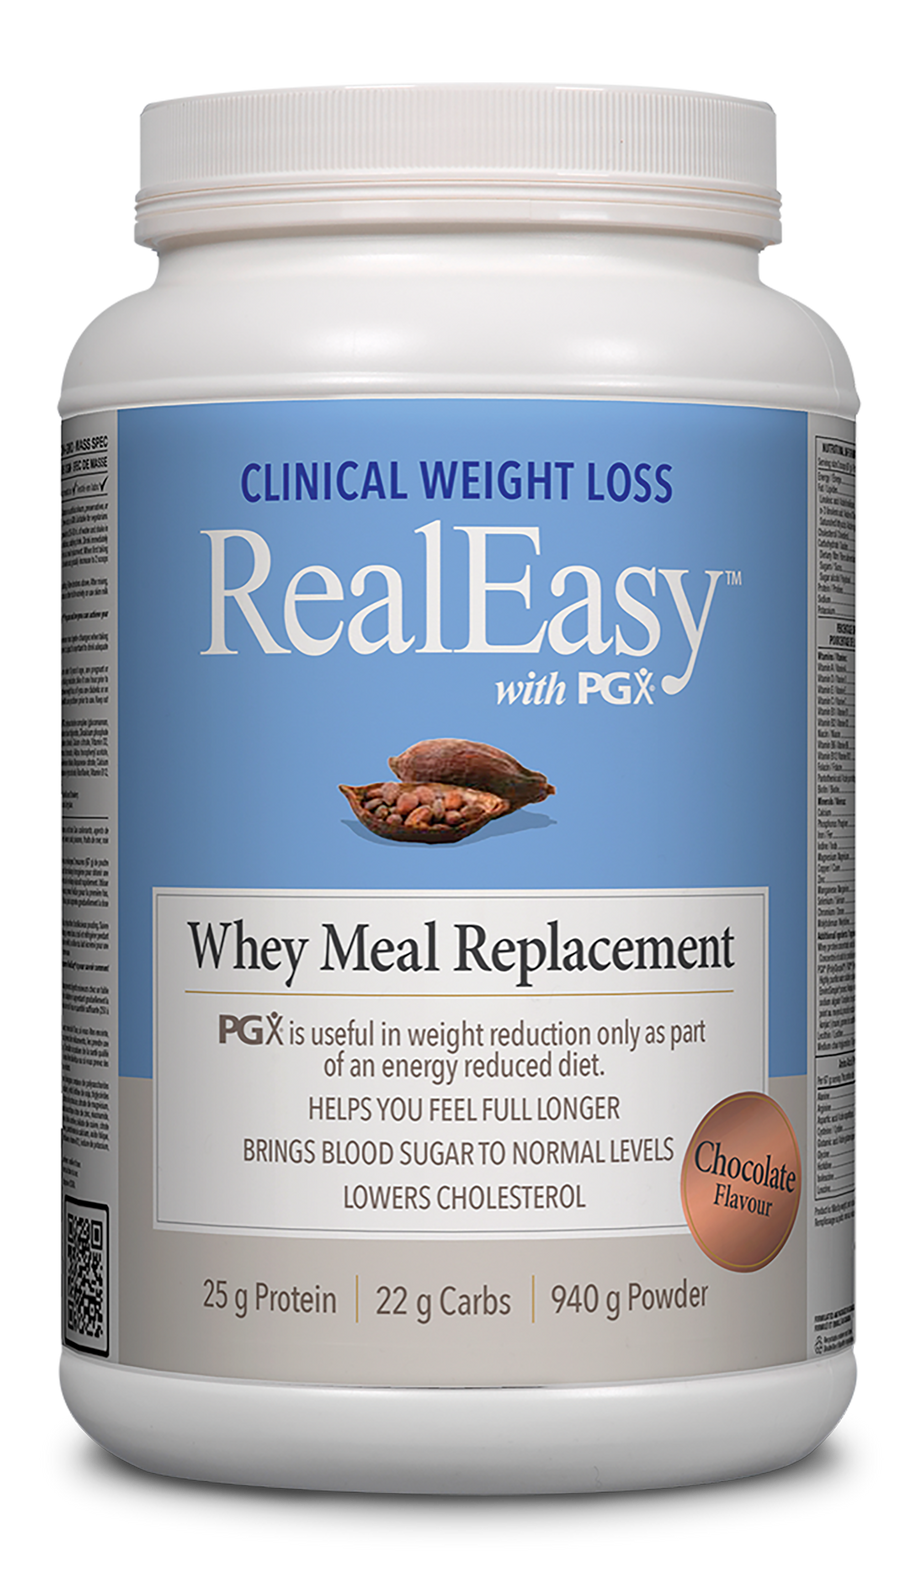 Natural Factors RealEasy with PGX Whey Meal Replacement Chocolate Flavour 940g Powder